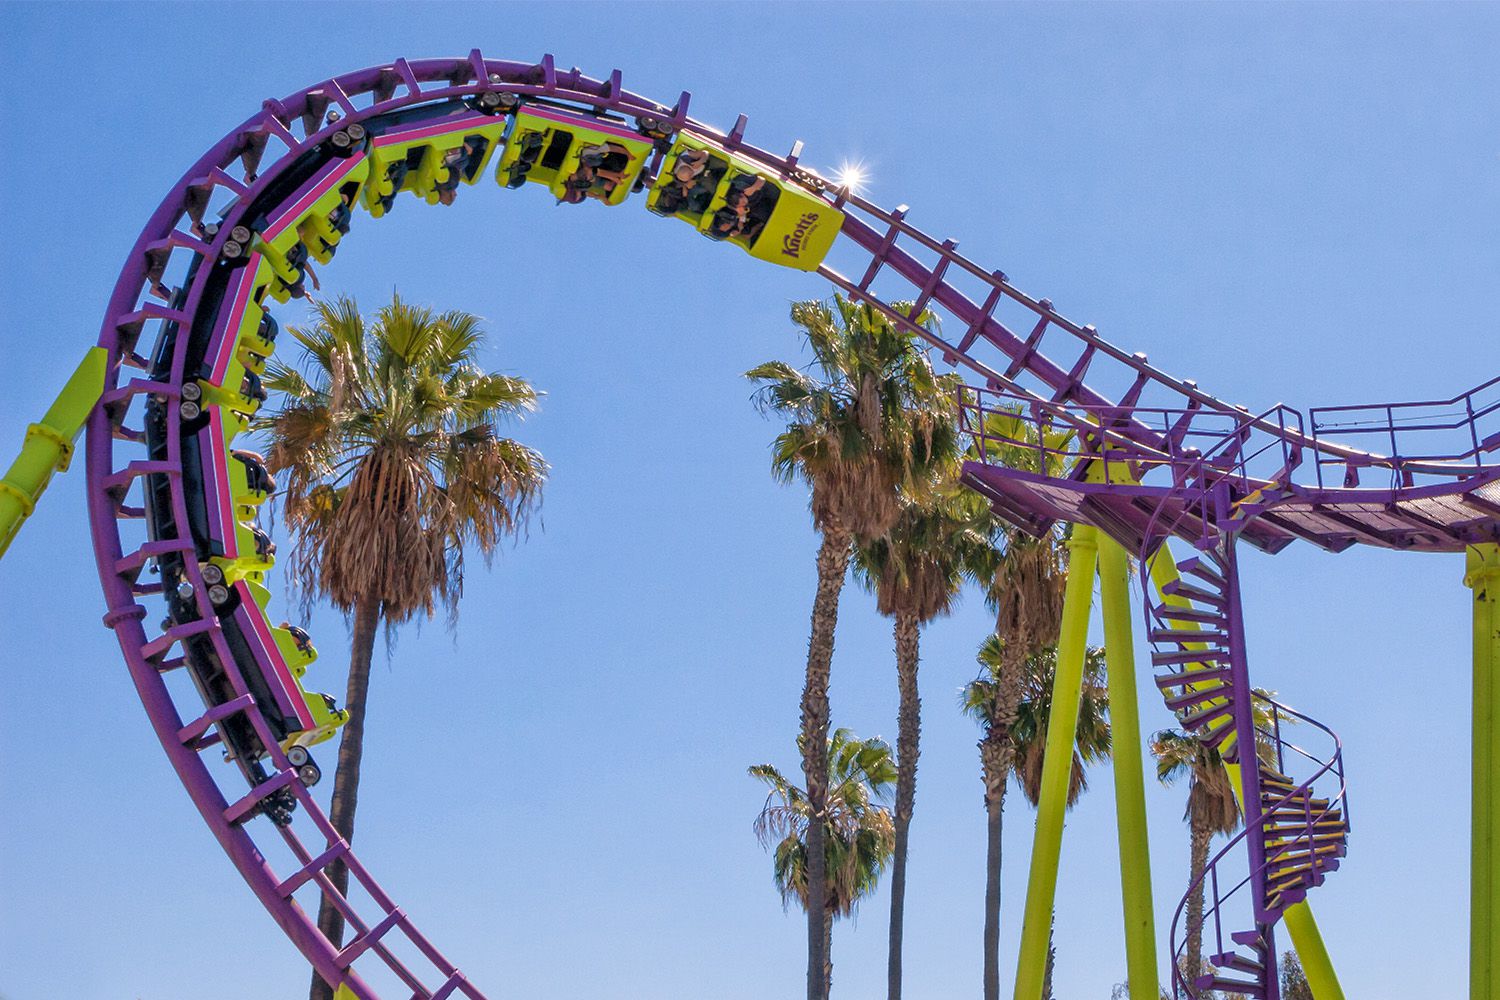 California Theme Parks How to Find the Best Amusements